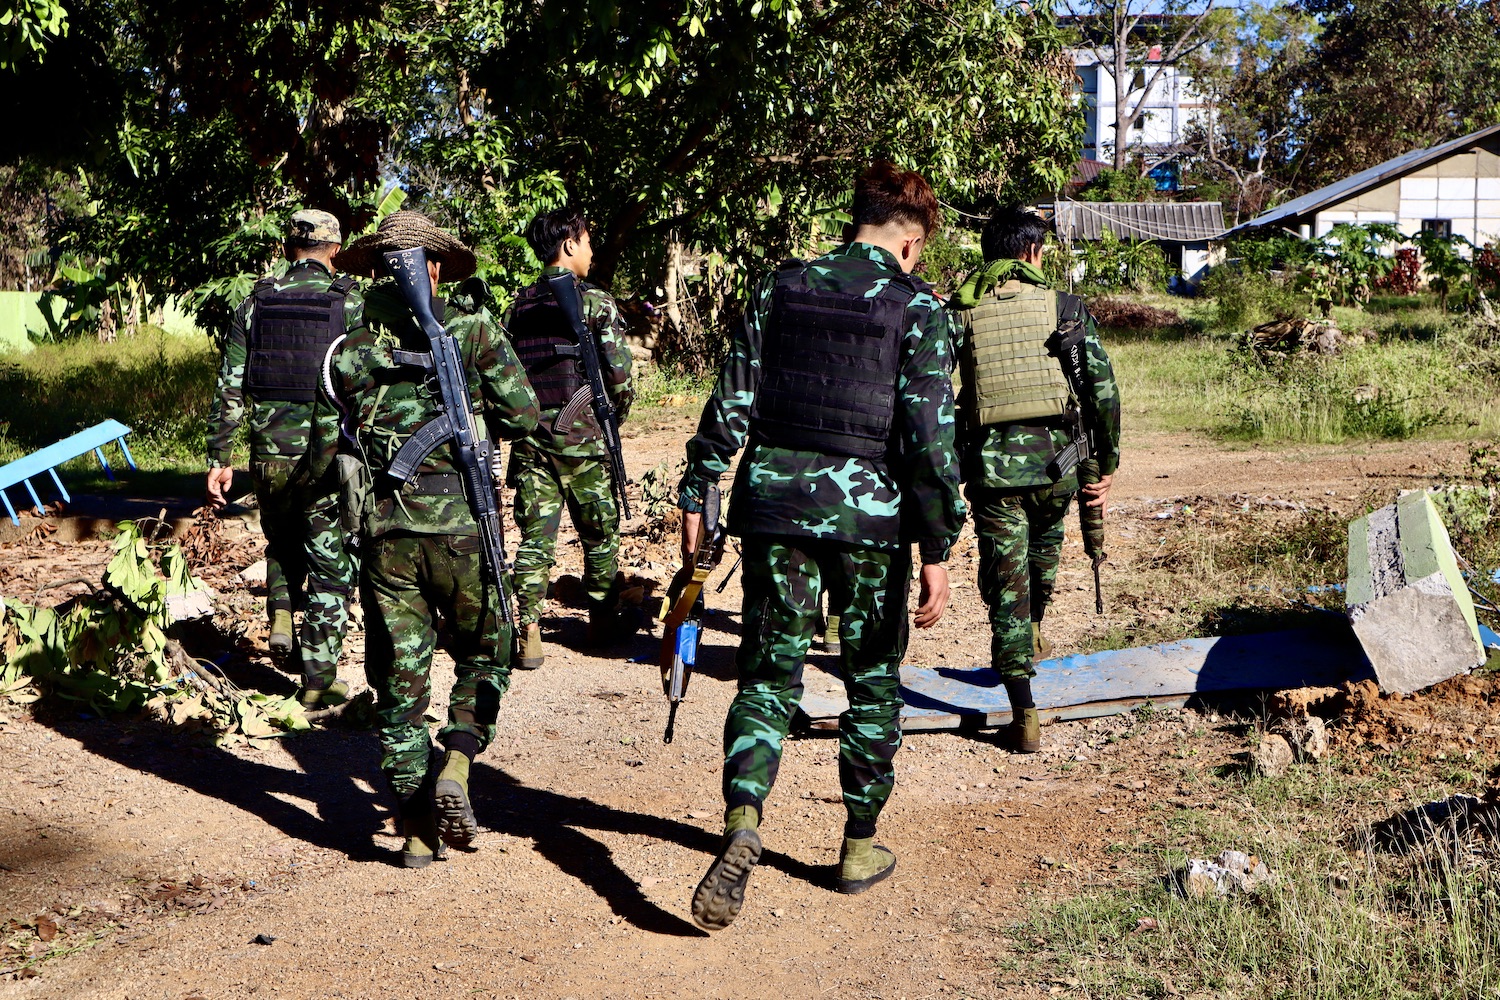 KNDF troops on the streets of downtown Loikaw on January 2. (Andrew Nachemson | Frontier)